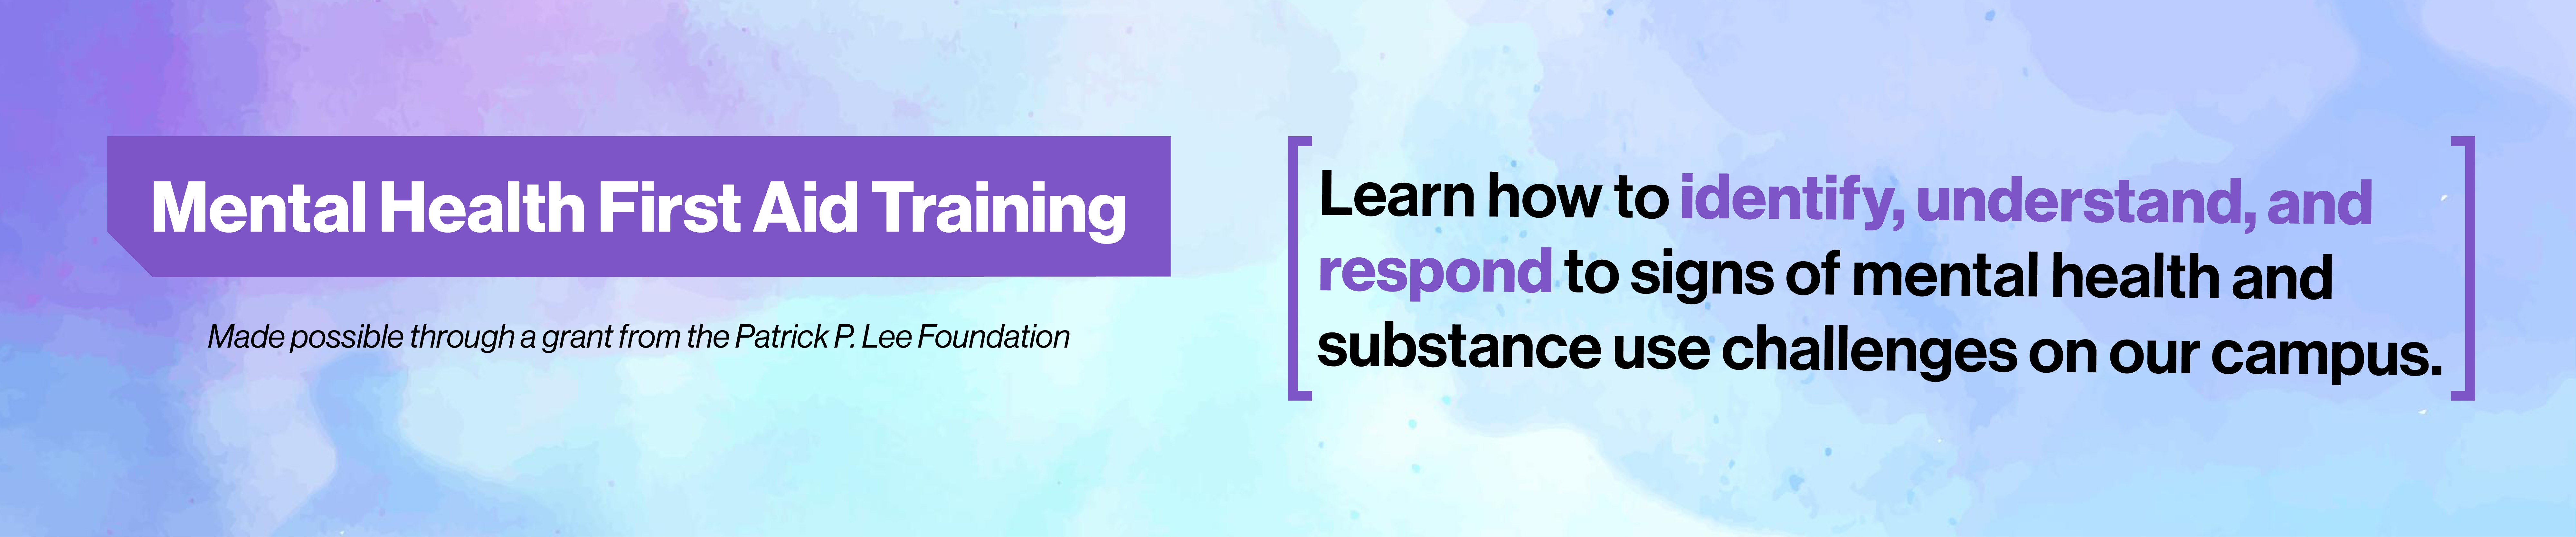 Mental Health First Aid Training Learn how to identify, understand, and respond to signs of mental health and substance use challenges on our campus.